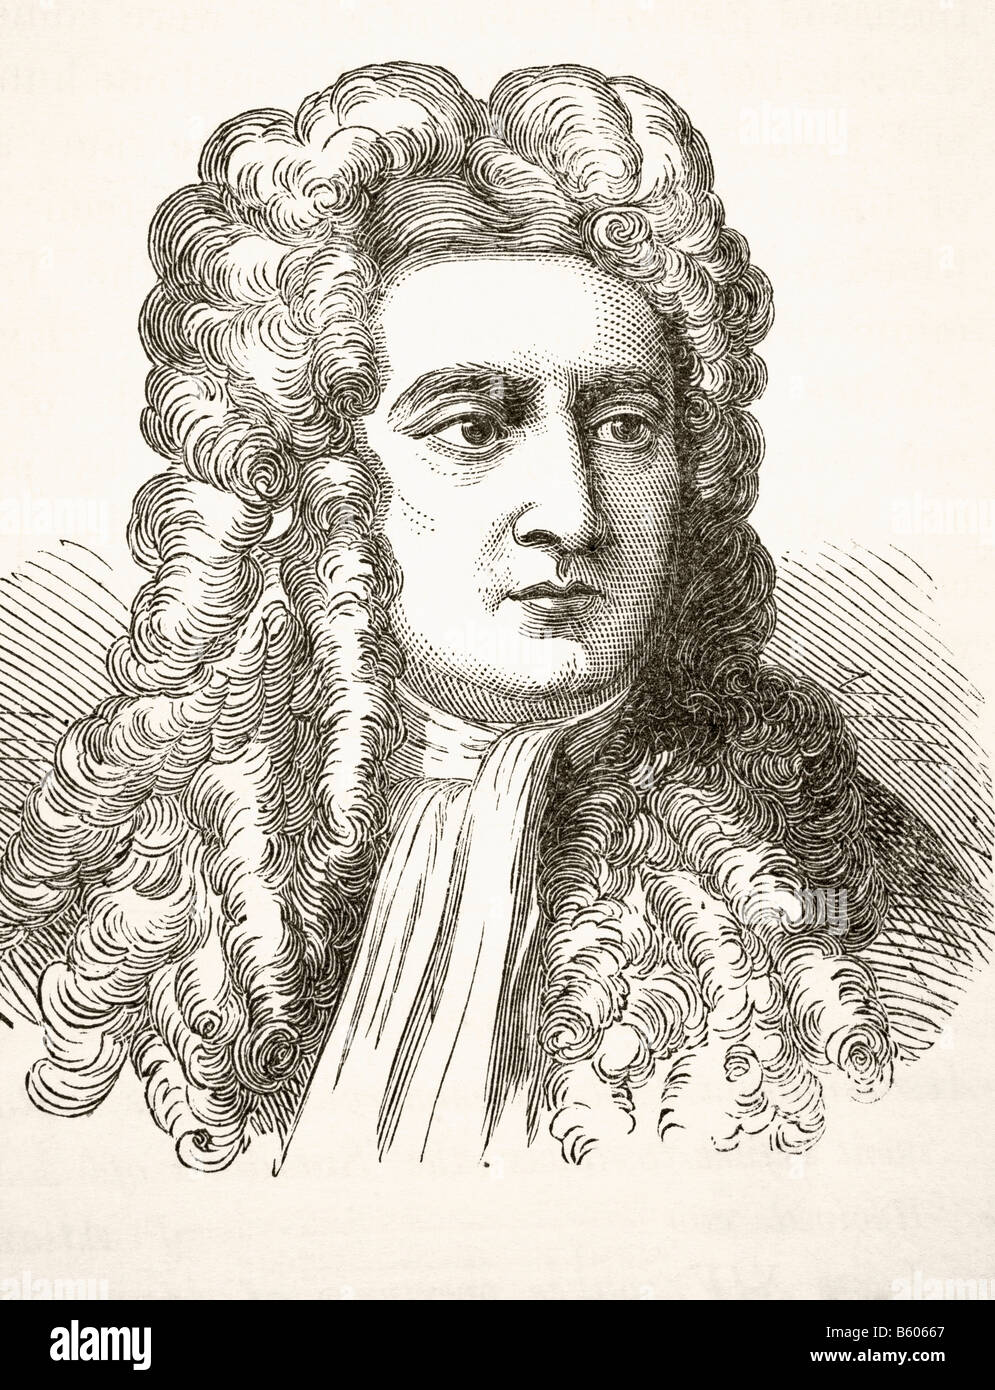 Sir Isaac Newton, 1642 - 1727. English physicist and mathematical scientist  Stock Photo - Alamy